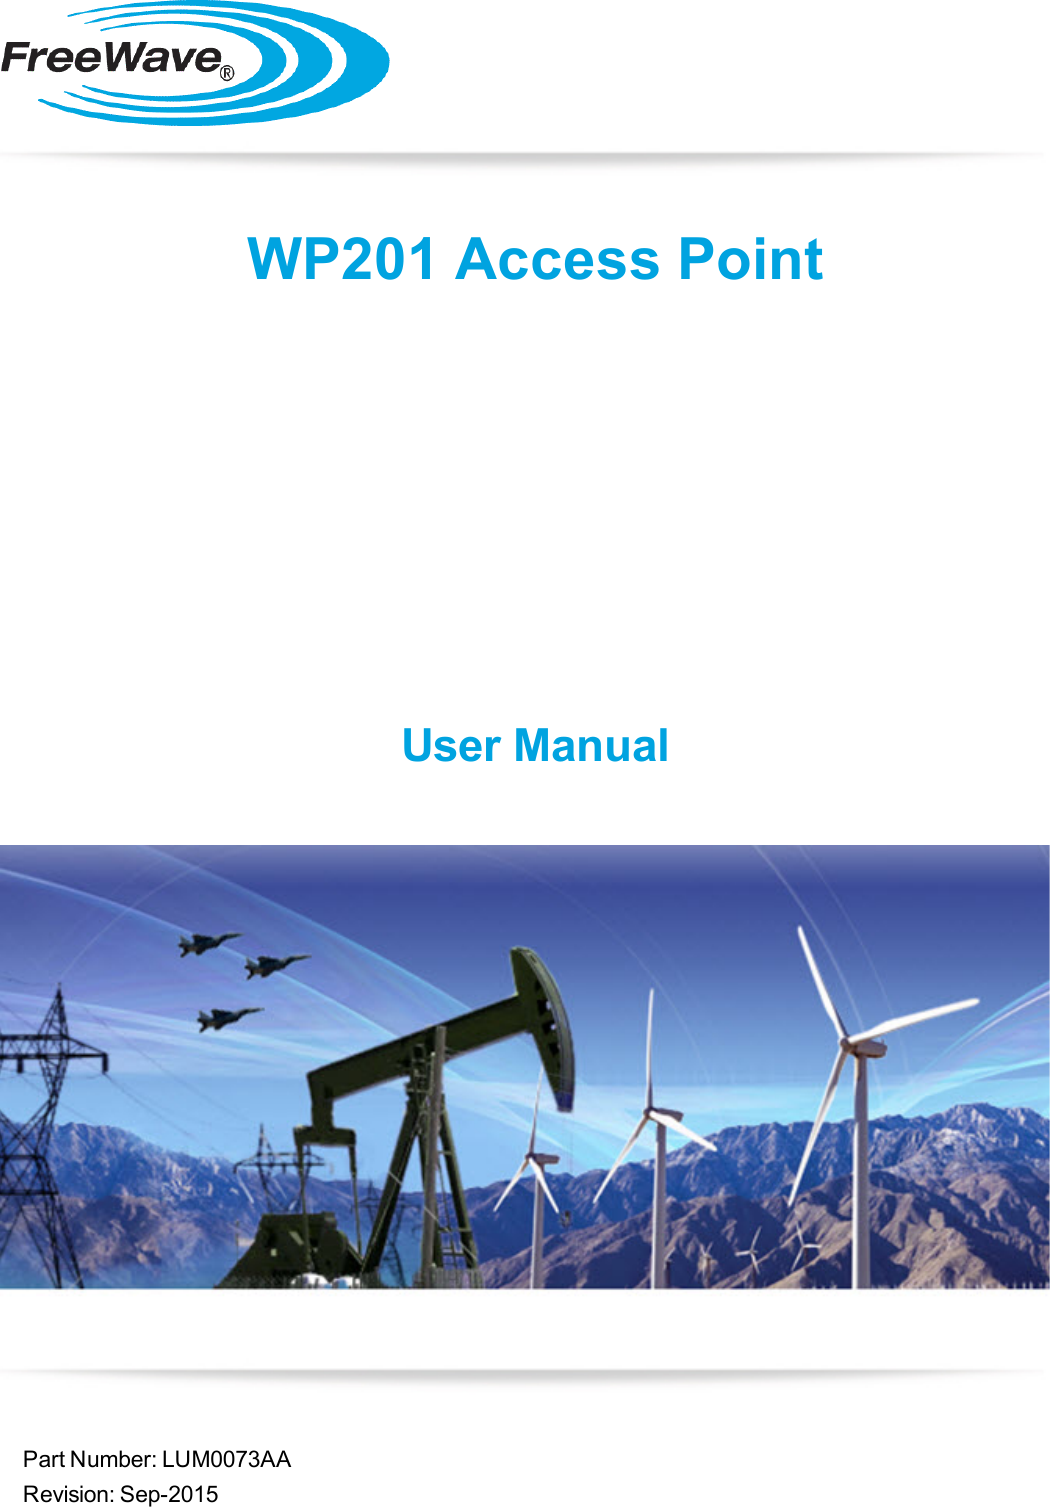 Part Number: LUM0073AARevision: Sep-2015WP201 Access PointUser Manual